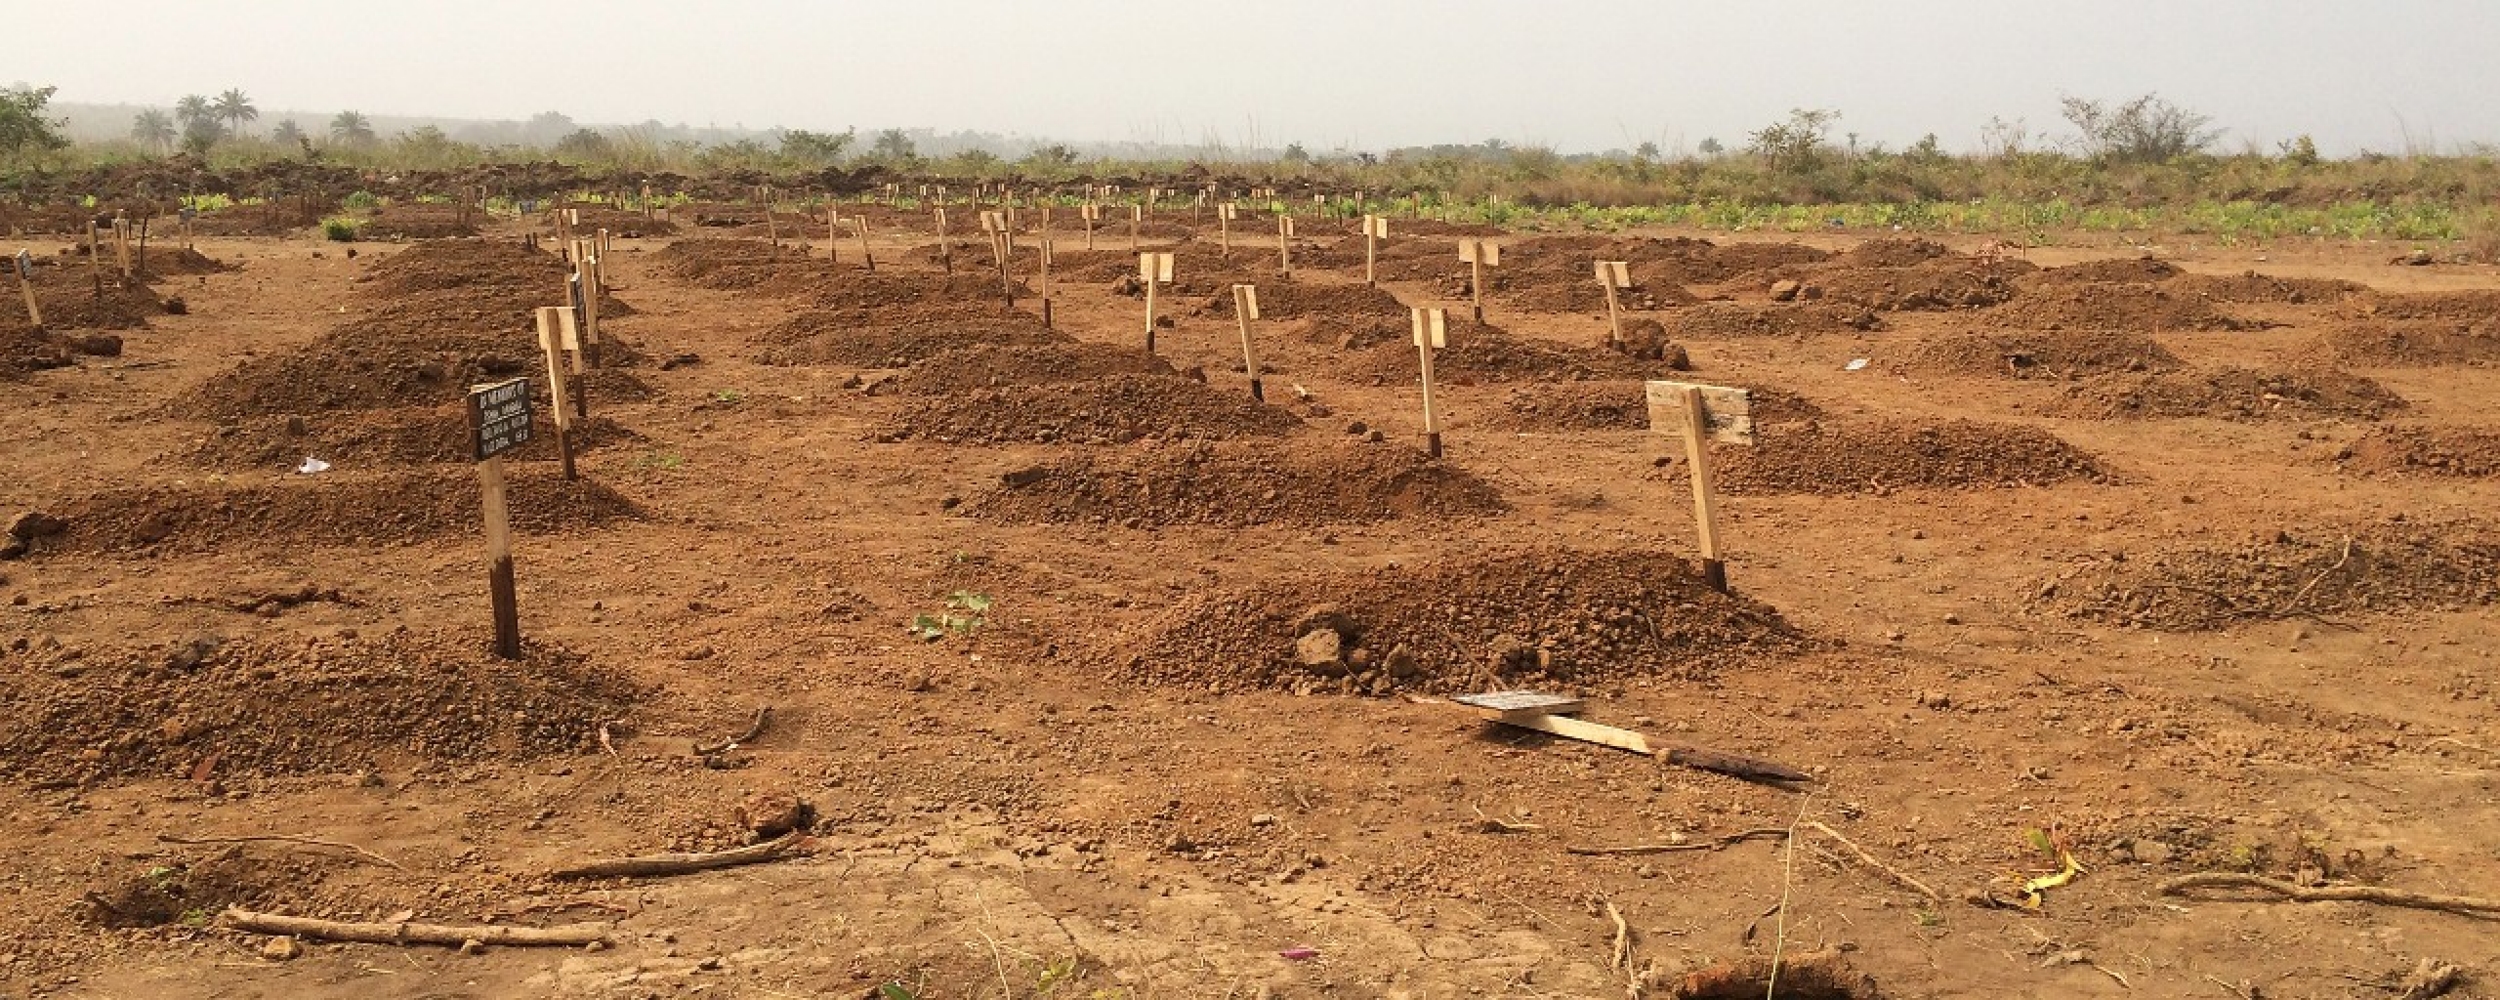 A far-too common site in Sierra Leone of many graves of those who succumbed to the Ebola virus.